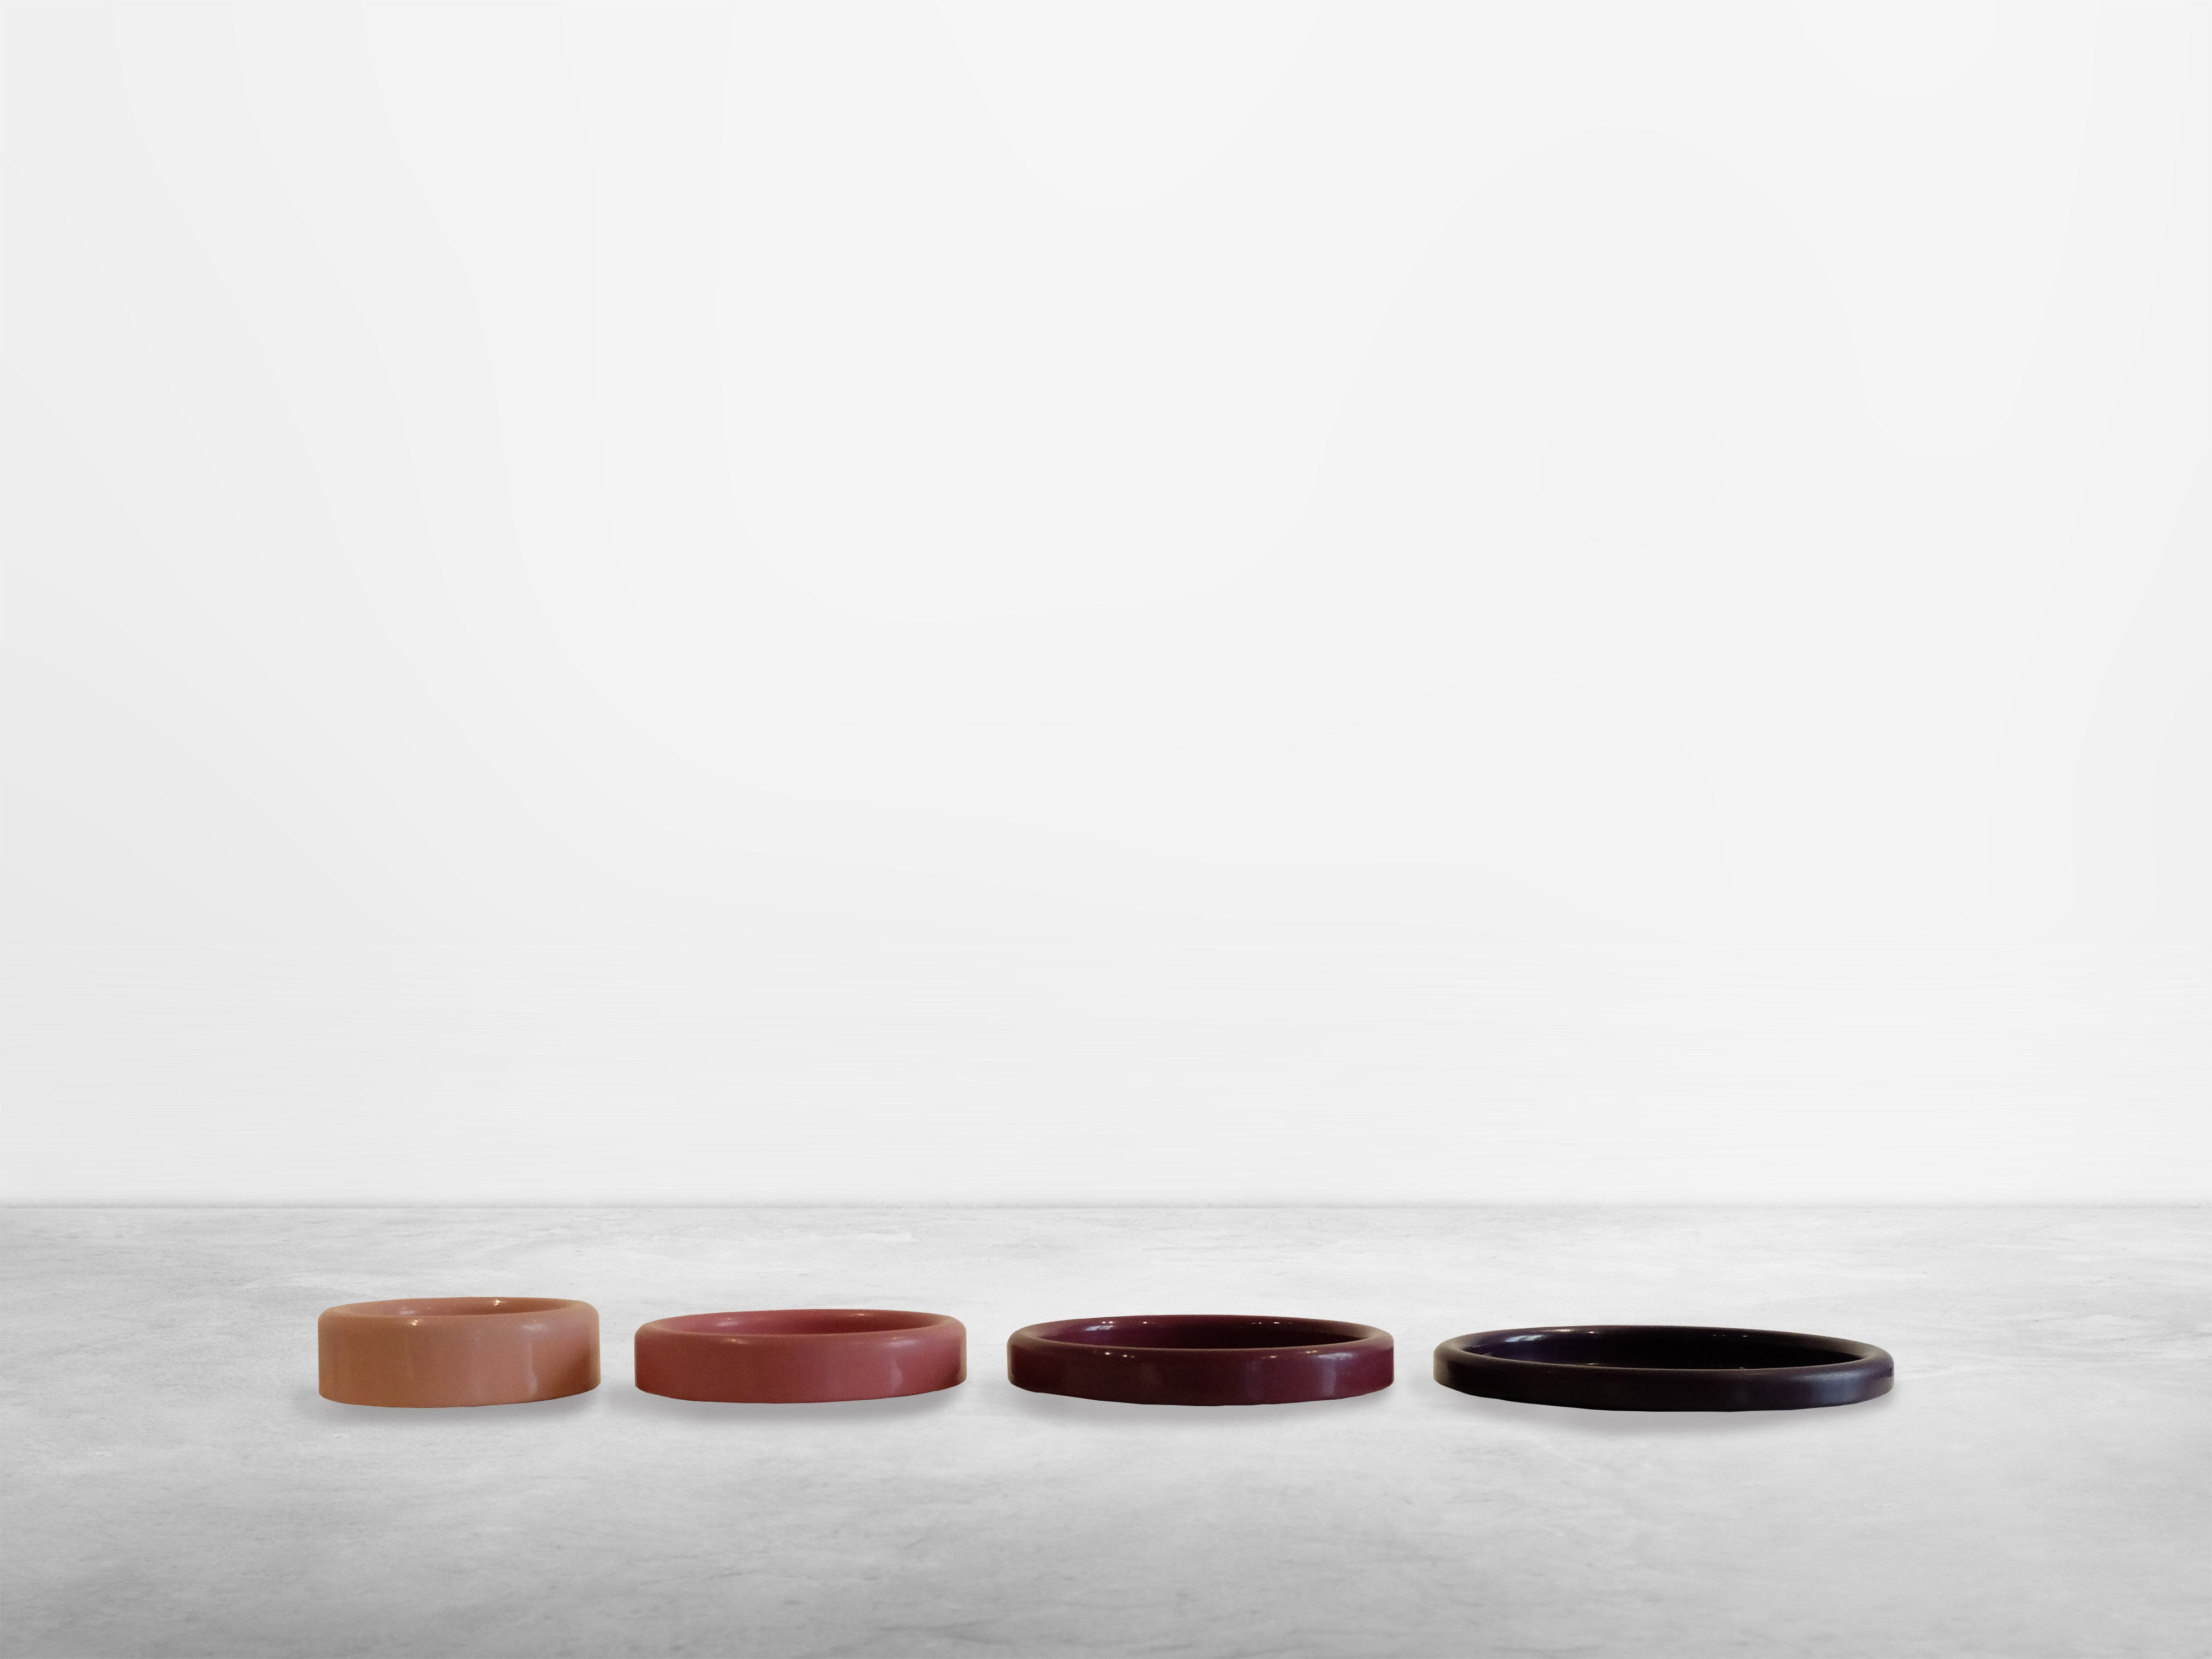 Set of Four Trays by Gianfranco Frattini for Progetti, 1970

Set of four coloured trays in laquered metal. These works with their curved and minimal lines can be used as excellent containers for a variety of small objects. 

Gianfranco Frattini